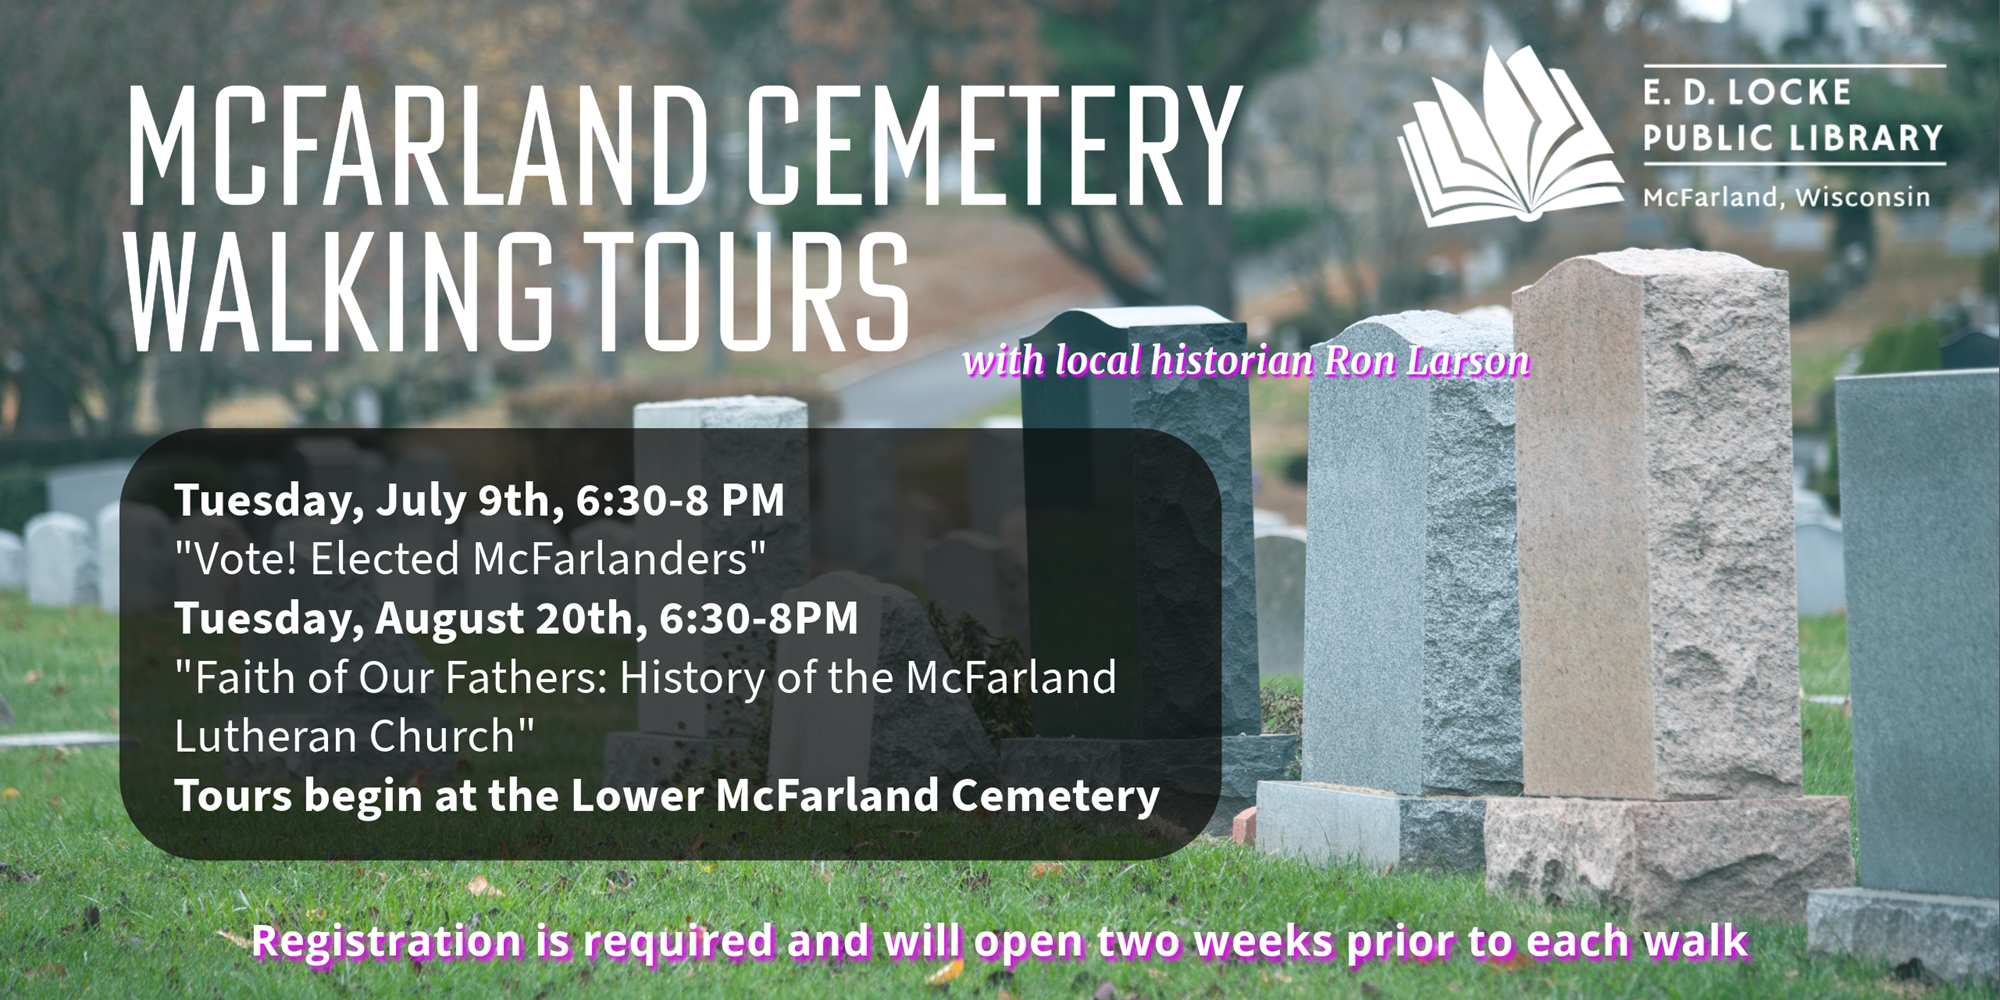 McFarland Cemetery Walking Tours with local historian Ron Larson. Tuesday, July 9th, 6:30-8 PM "Vote! Elected McFarlanders" Tuesday, August 20th, 6:30-8 PM: "Faith of Our Fathers: History of the McFarland Lutheran Church." Tours begin at the Lower McFarland Cemetery. Registration is required and will open two weeks prior to each walk.